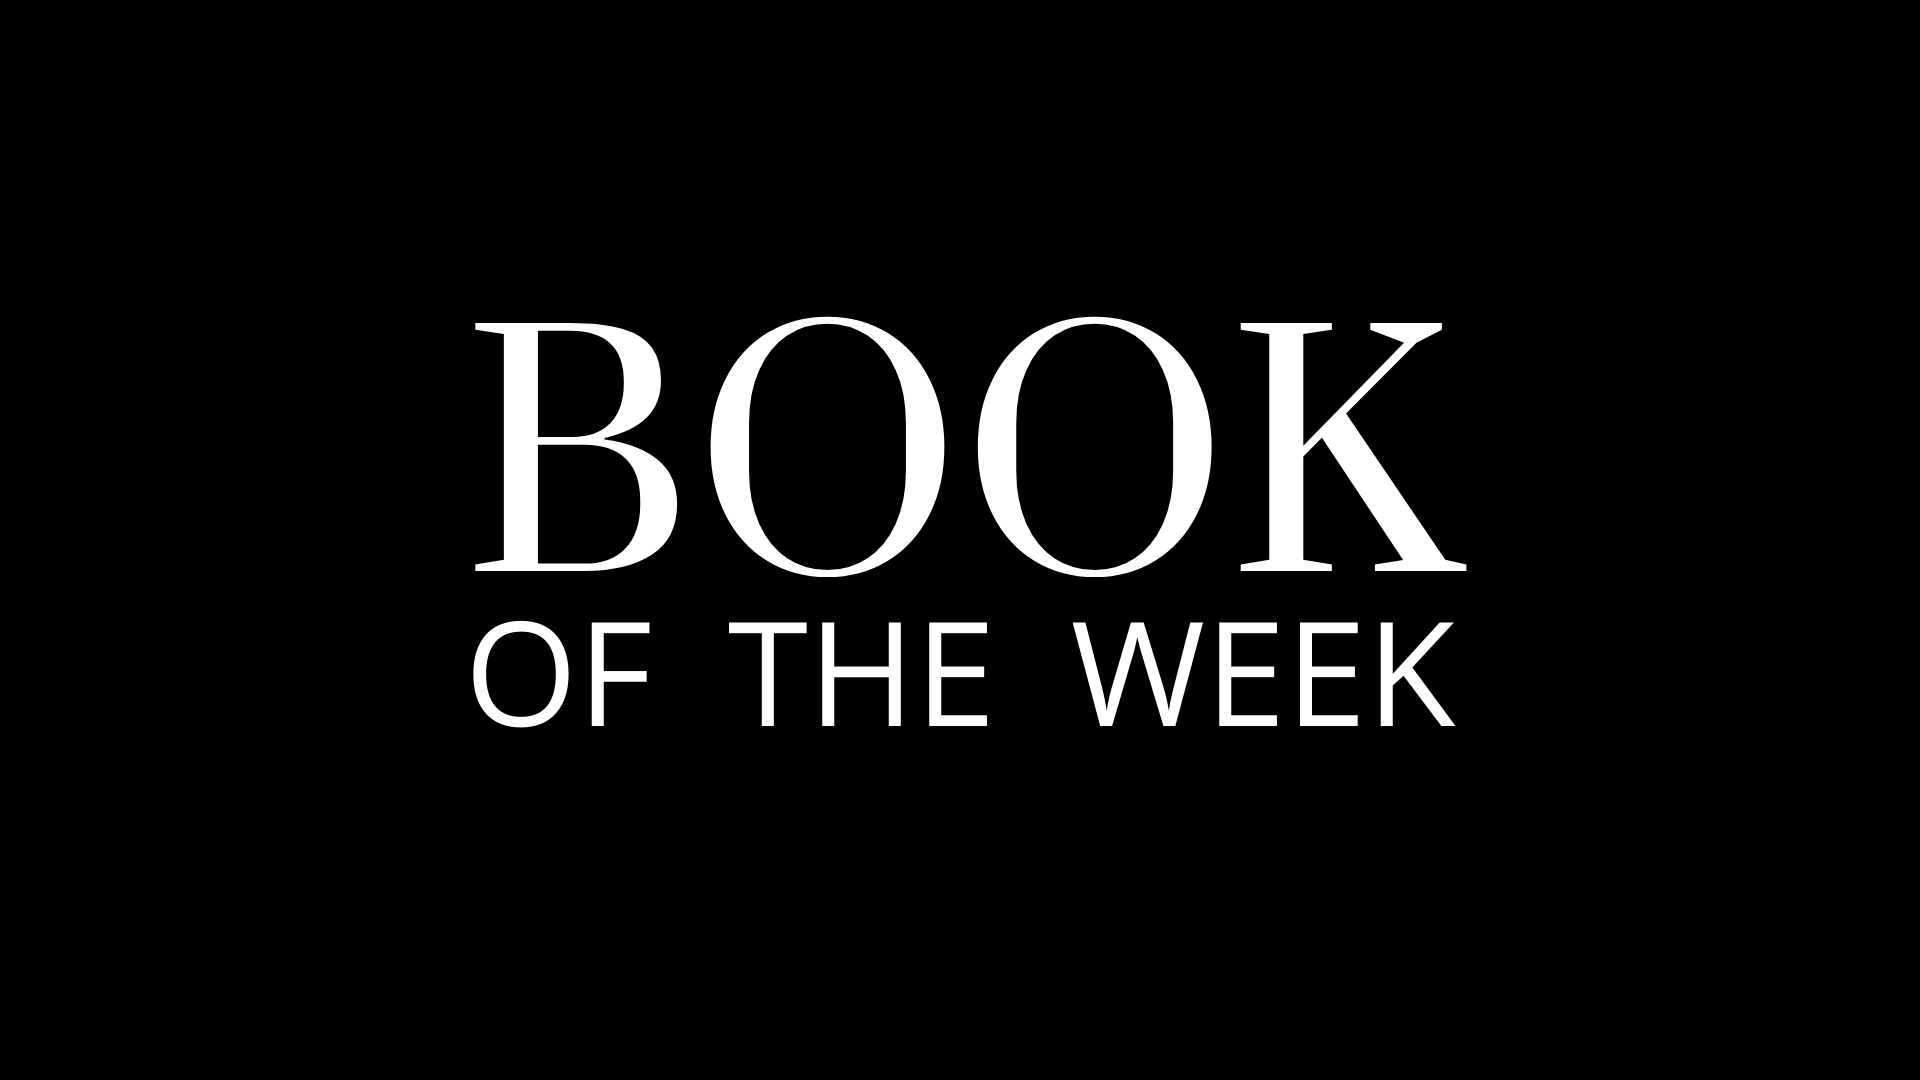 Book of the Week: Principles (Life and Work)